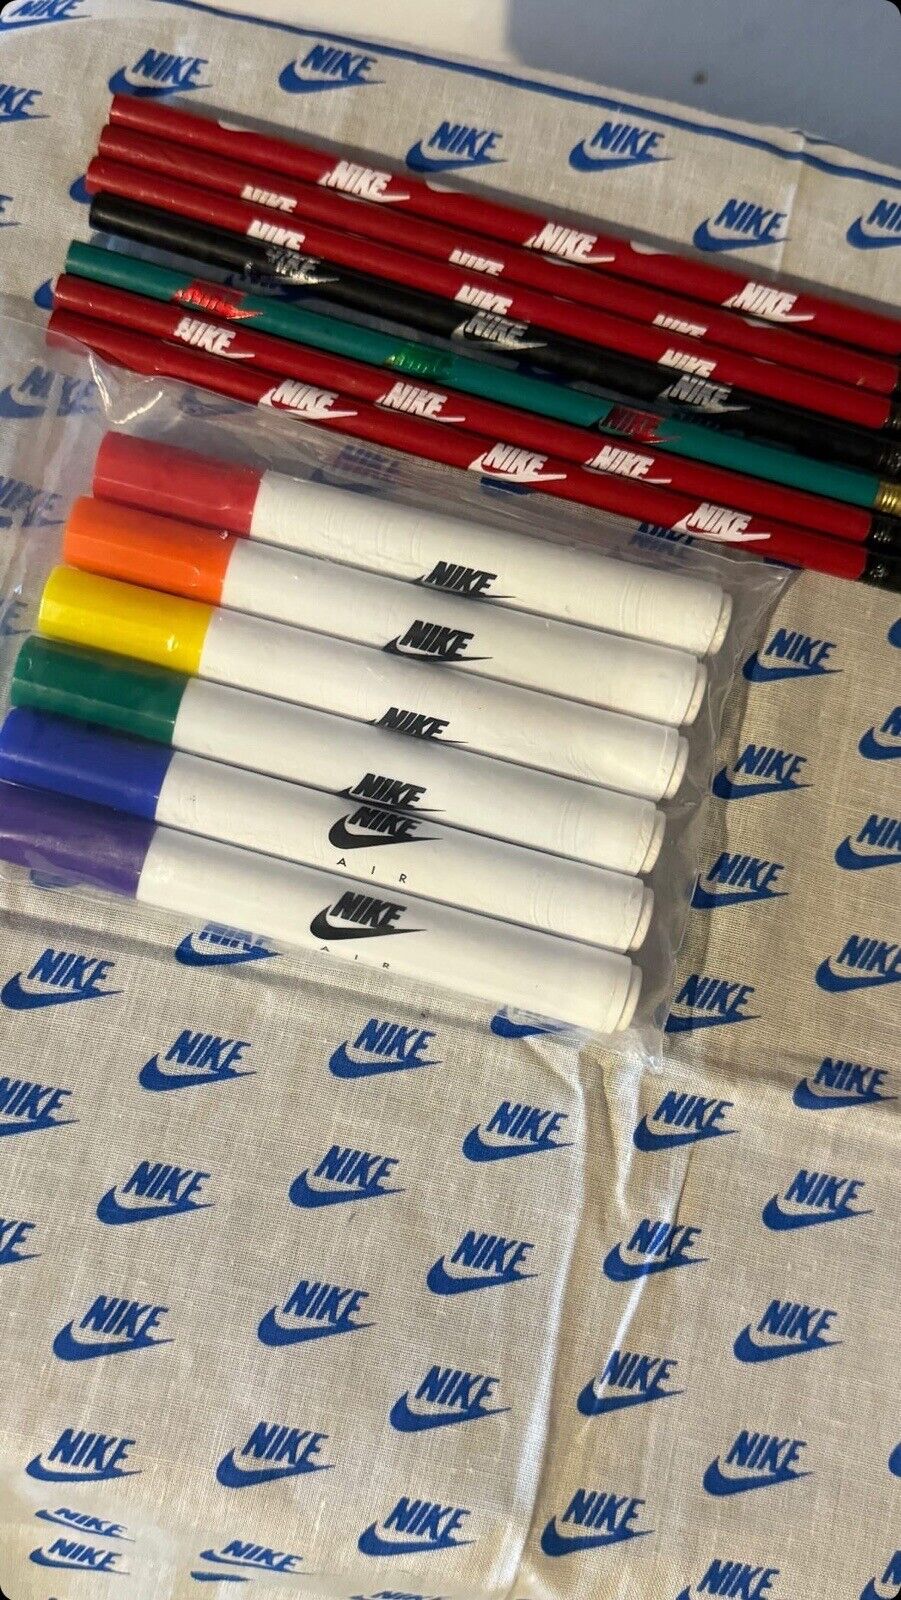 Rare Collectible Nike Markers & Pencils